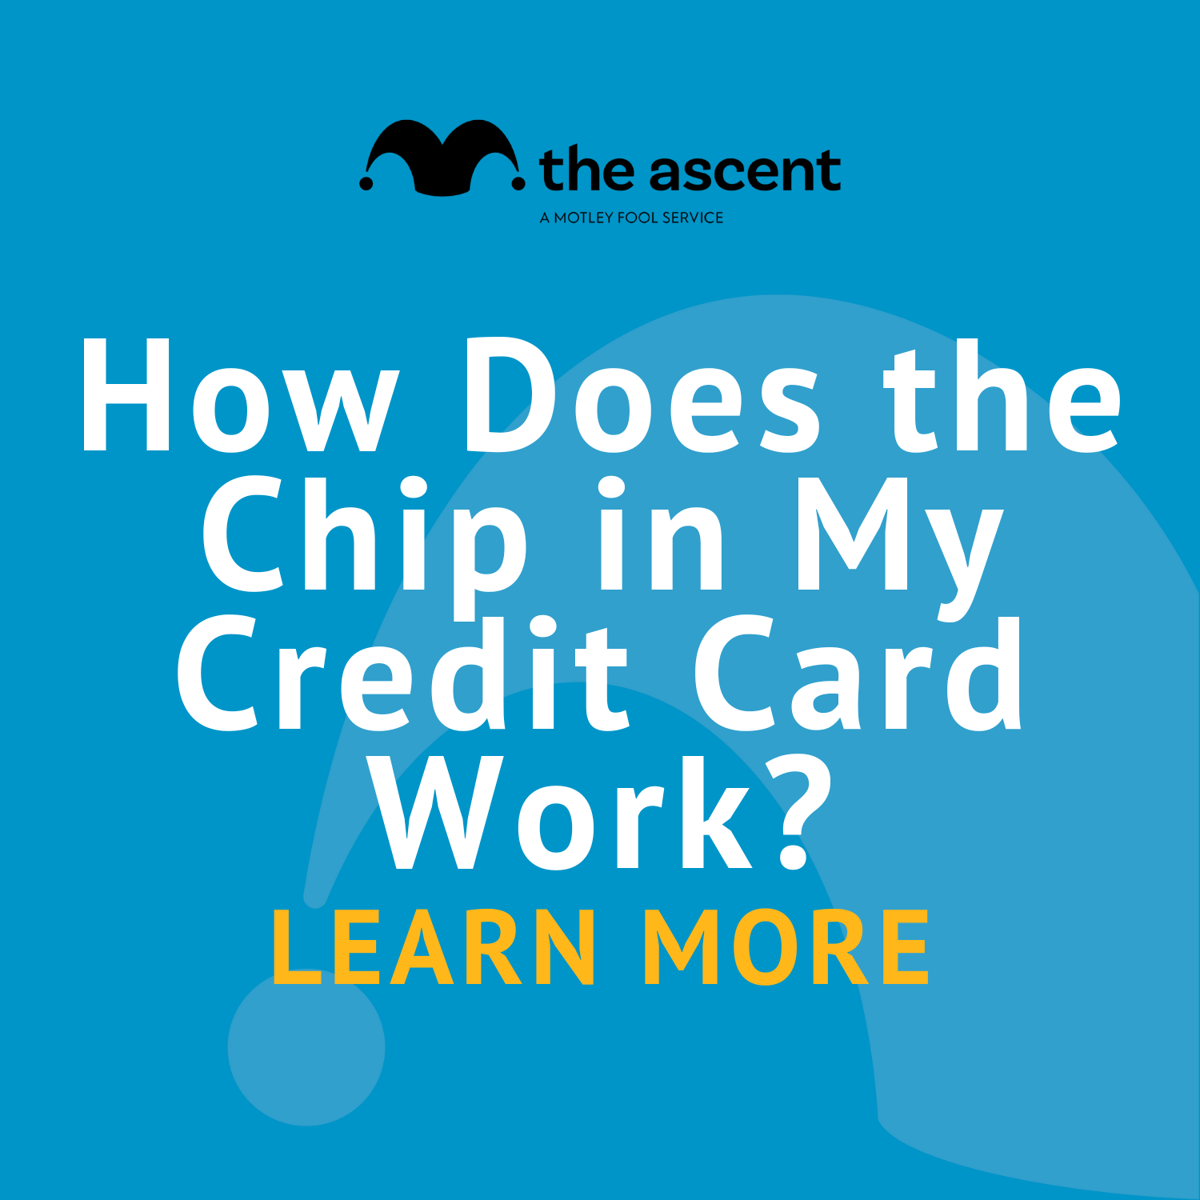 Why Are EMV Chip Cards So Much Safer Than Magnetic Strip Ones?